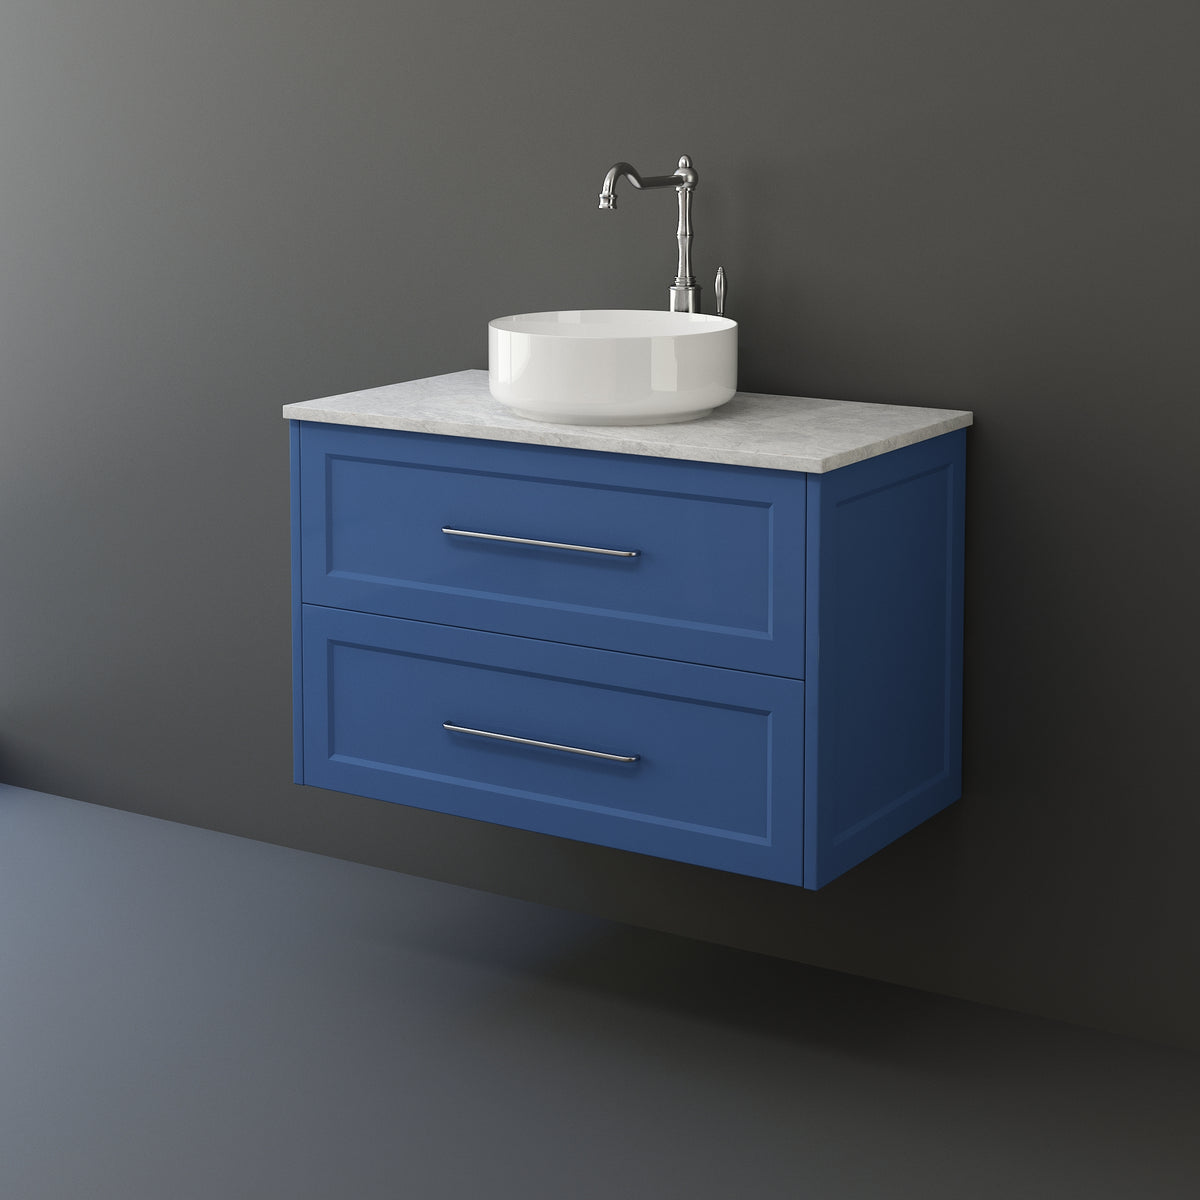 Buy Lily Wall Hung Bathroom Vanity in ANY COLOUR - ALL SIZES Online ...